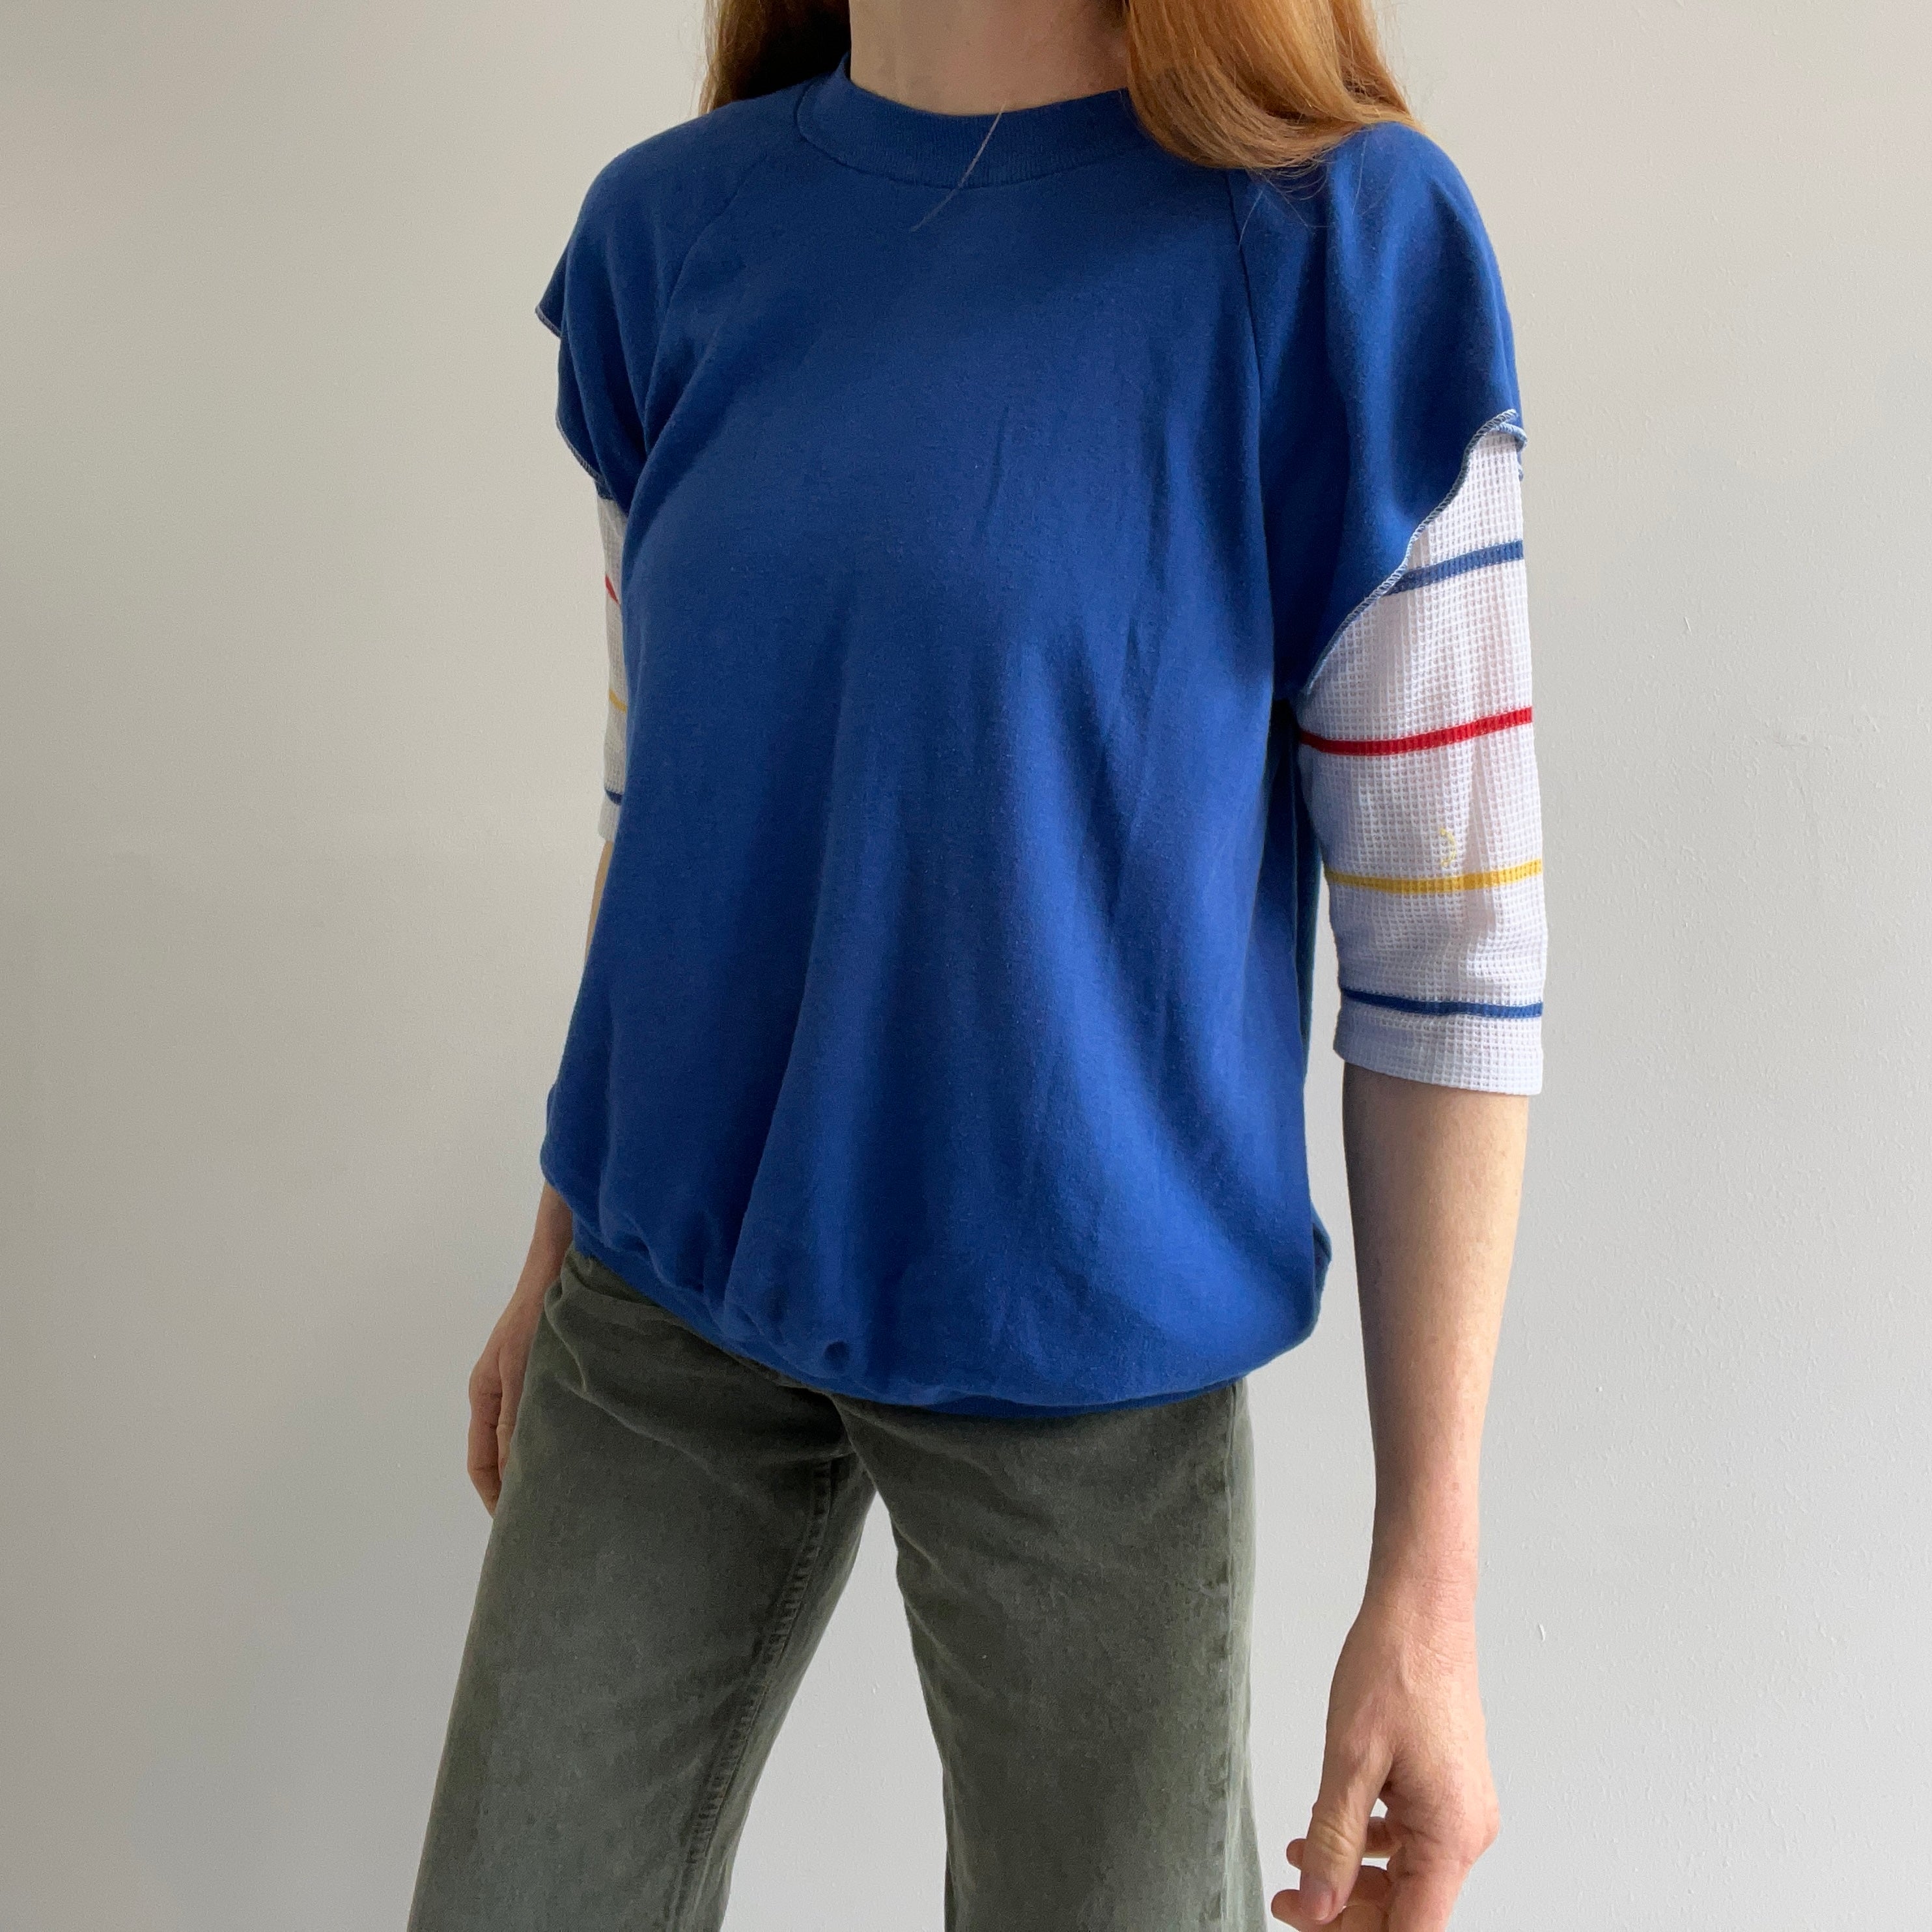 1980s Super 80s Built-In Sleeve Warm Up Shirt